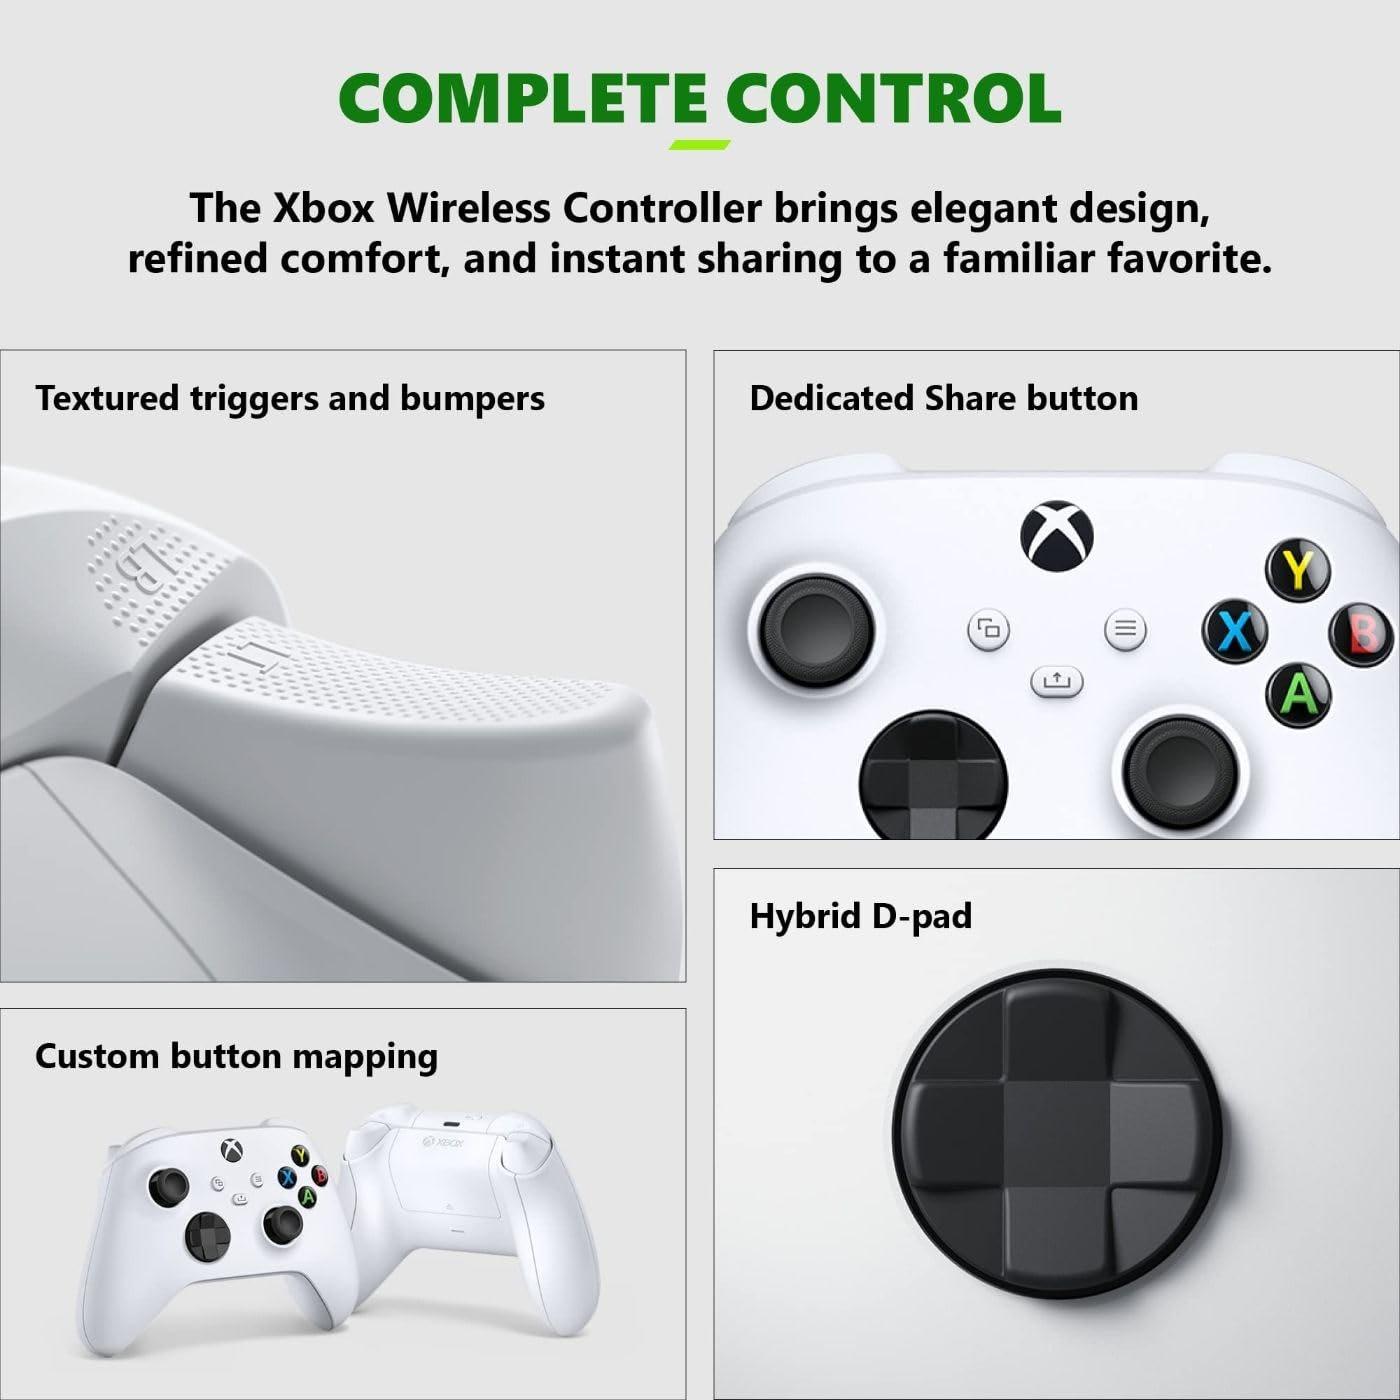 Xbox Series S – Starter Bundle - Includes hundreds of games with Game Pass  Ultimate 3 Month Membership - 512GB SSD All-Digital Gaming Console